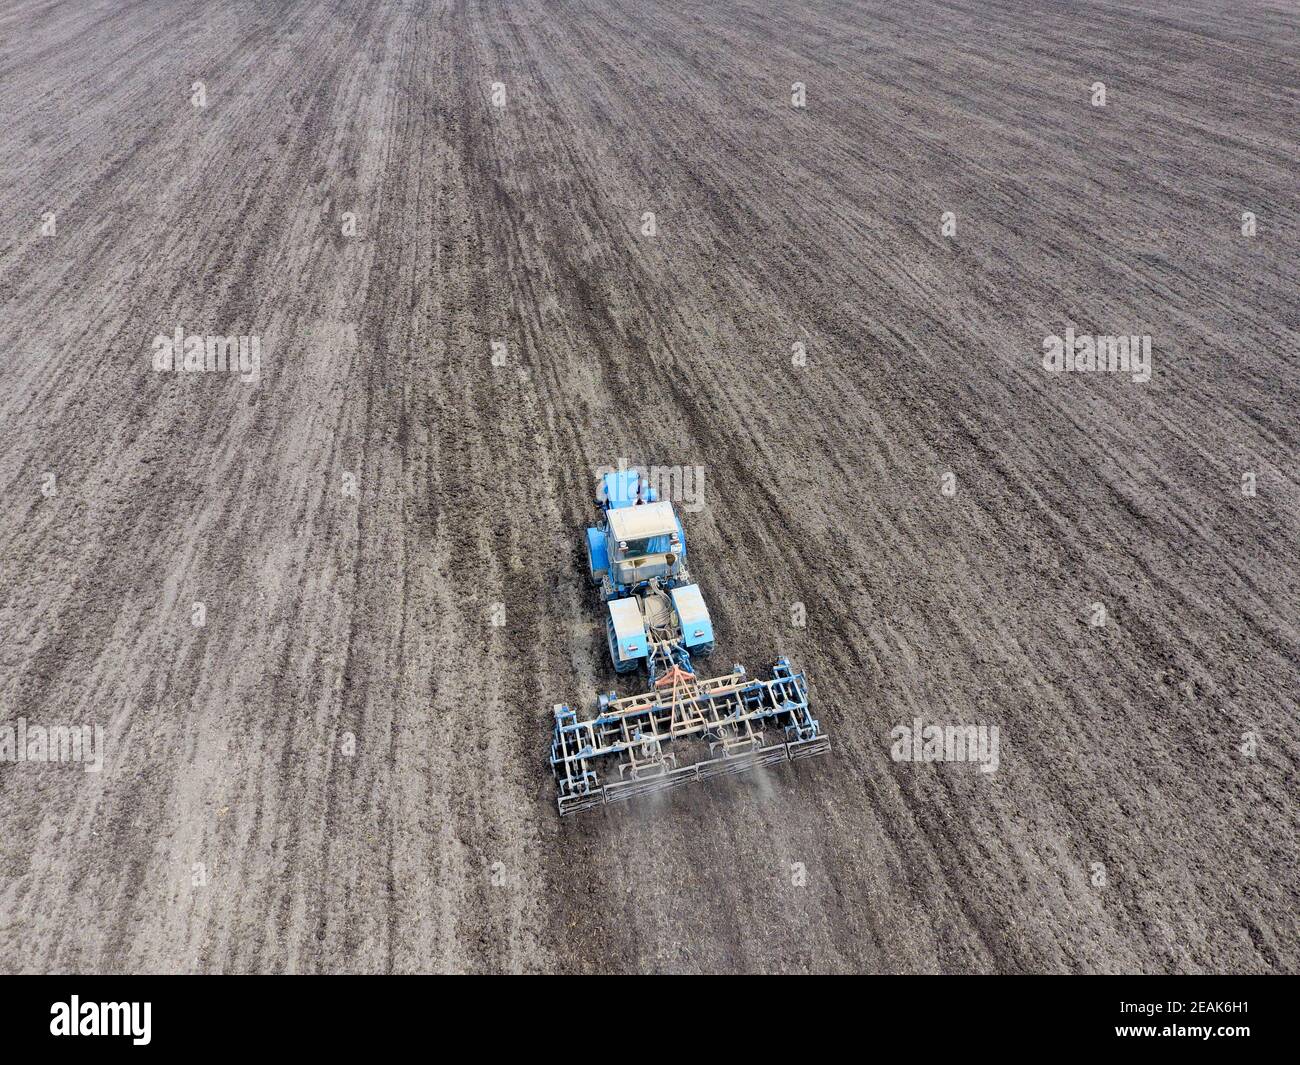 Young Farmer Sowing Crops At Field With Pneumatic Sowing Machine